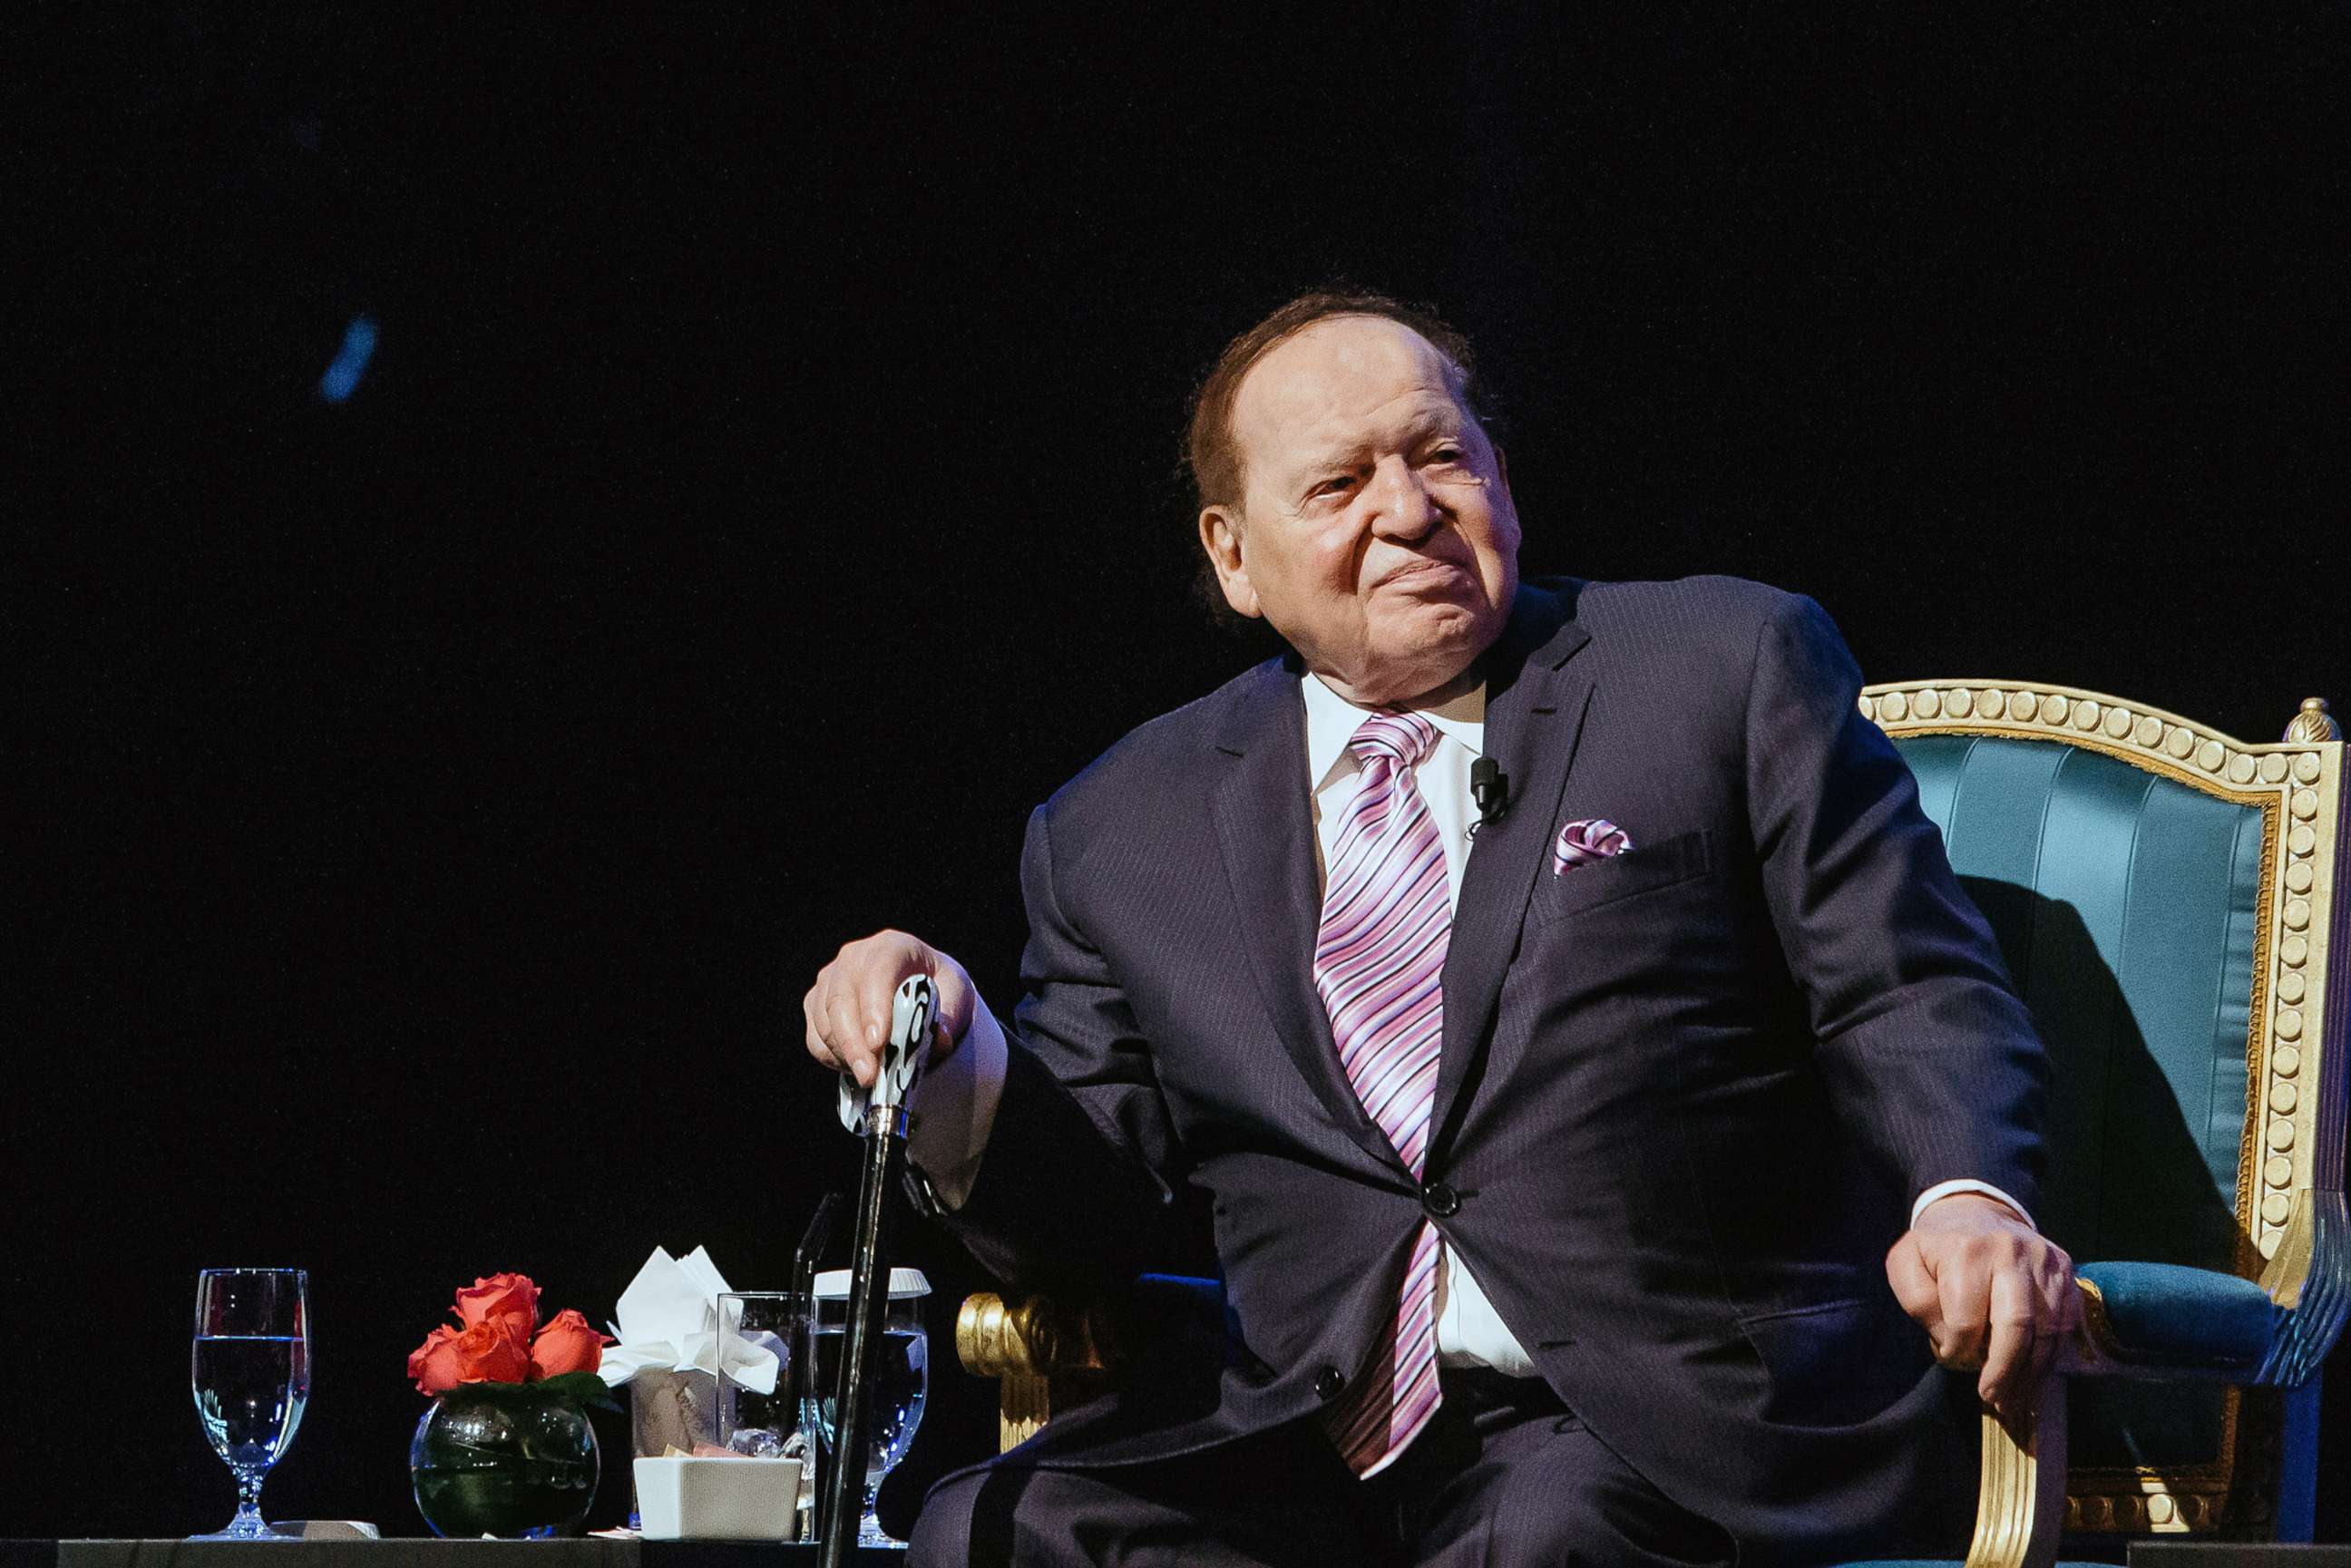 PHOTO: Billionaire Sheldon Adelson, chairman and chief executive officer of Las Vegas Sands Corp., attends a news conference at the company's Parisian Macao casino resort in Macau, China, Sept. 13, 2016.  